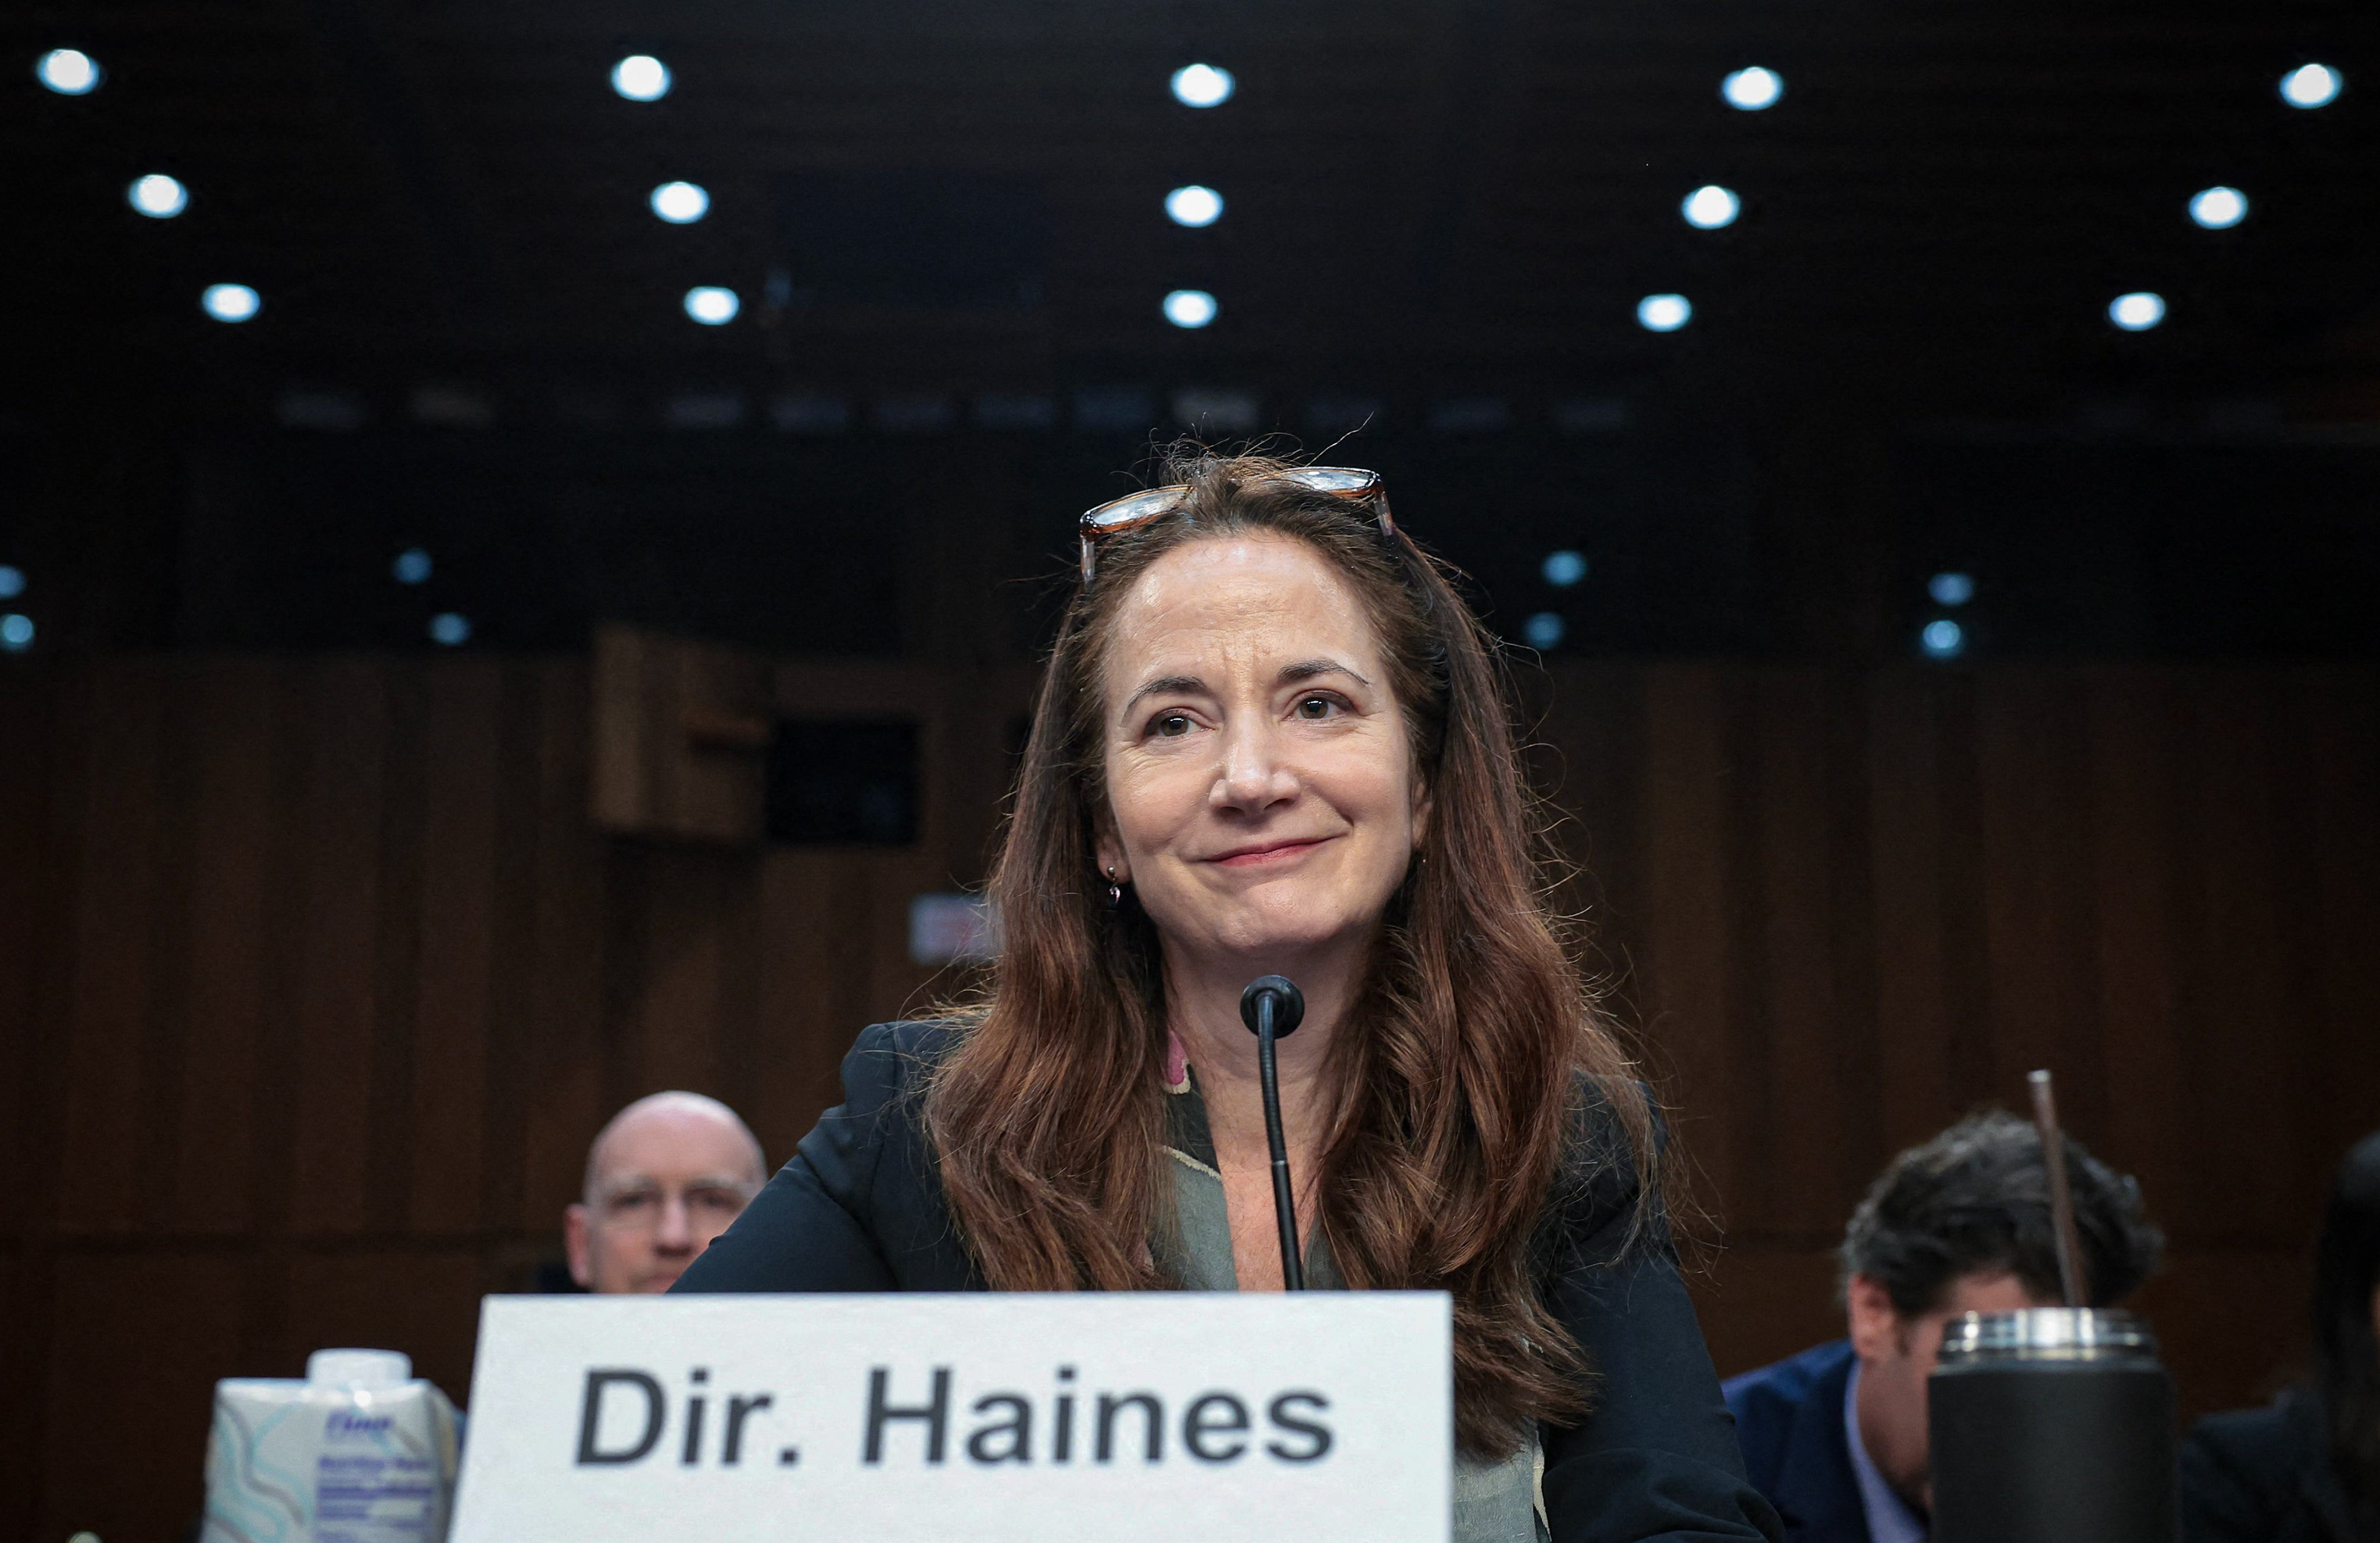 US director of national intelligence Avril Haines addressed the Senate Intelligence Committee on Wednesday. She said China was taking advantage of recent tech advances to generate content. Photo: Getty Images via AFP